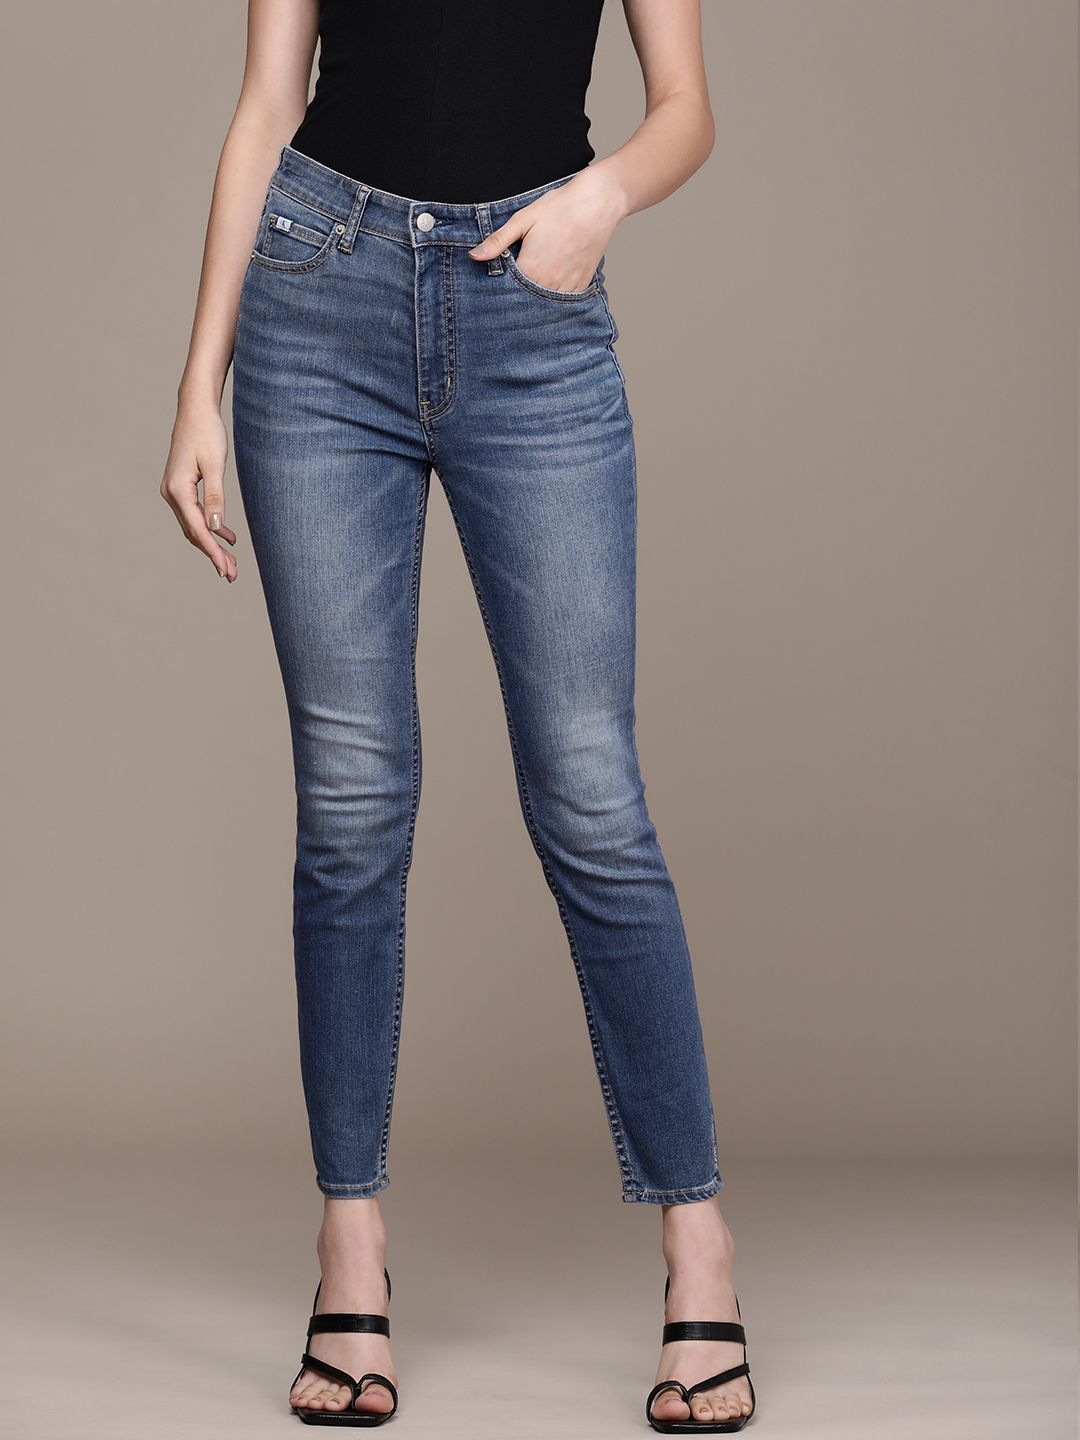 Calvin Klein Jeans Women Blue Skinny Fit High-Rise Light Fade Stretchable Jeans Price in India